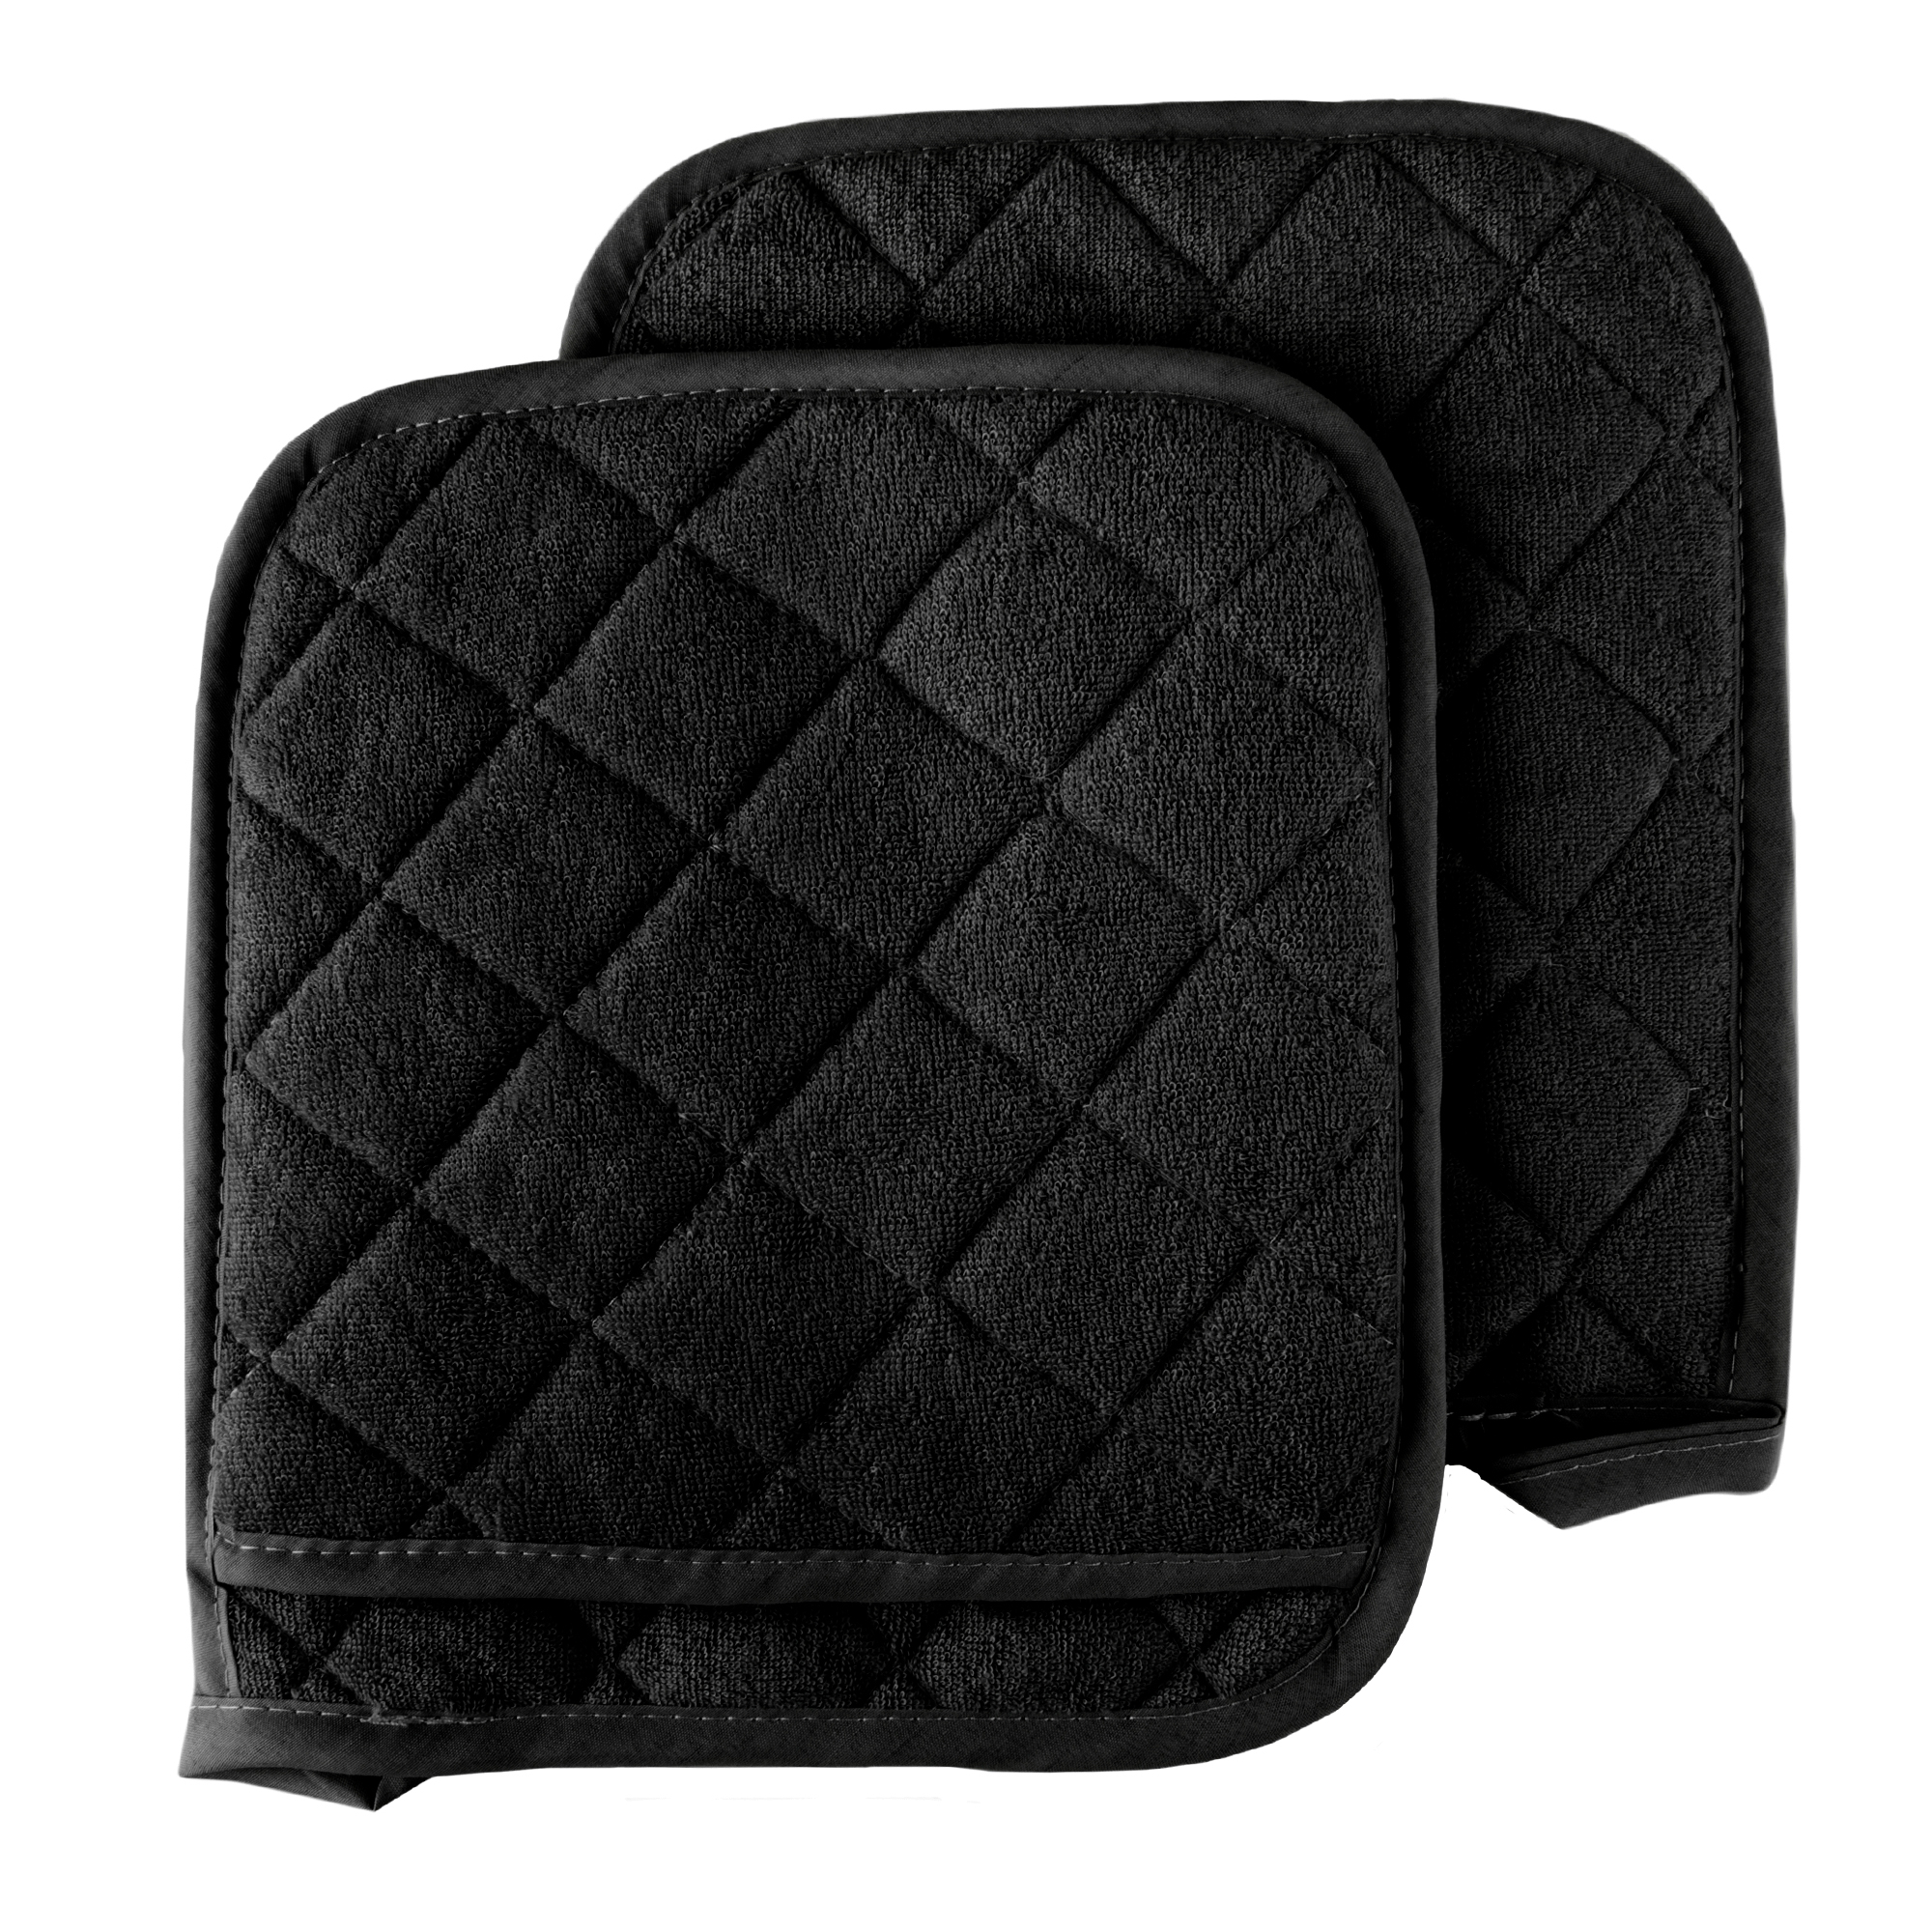 Set of 2 Cotton Pot Holders Flame Heat Protection Big Oven Mitts 8 x 9 Black